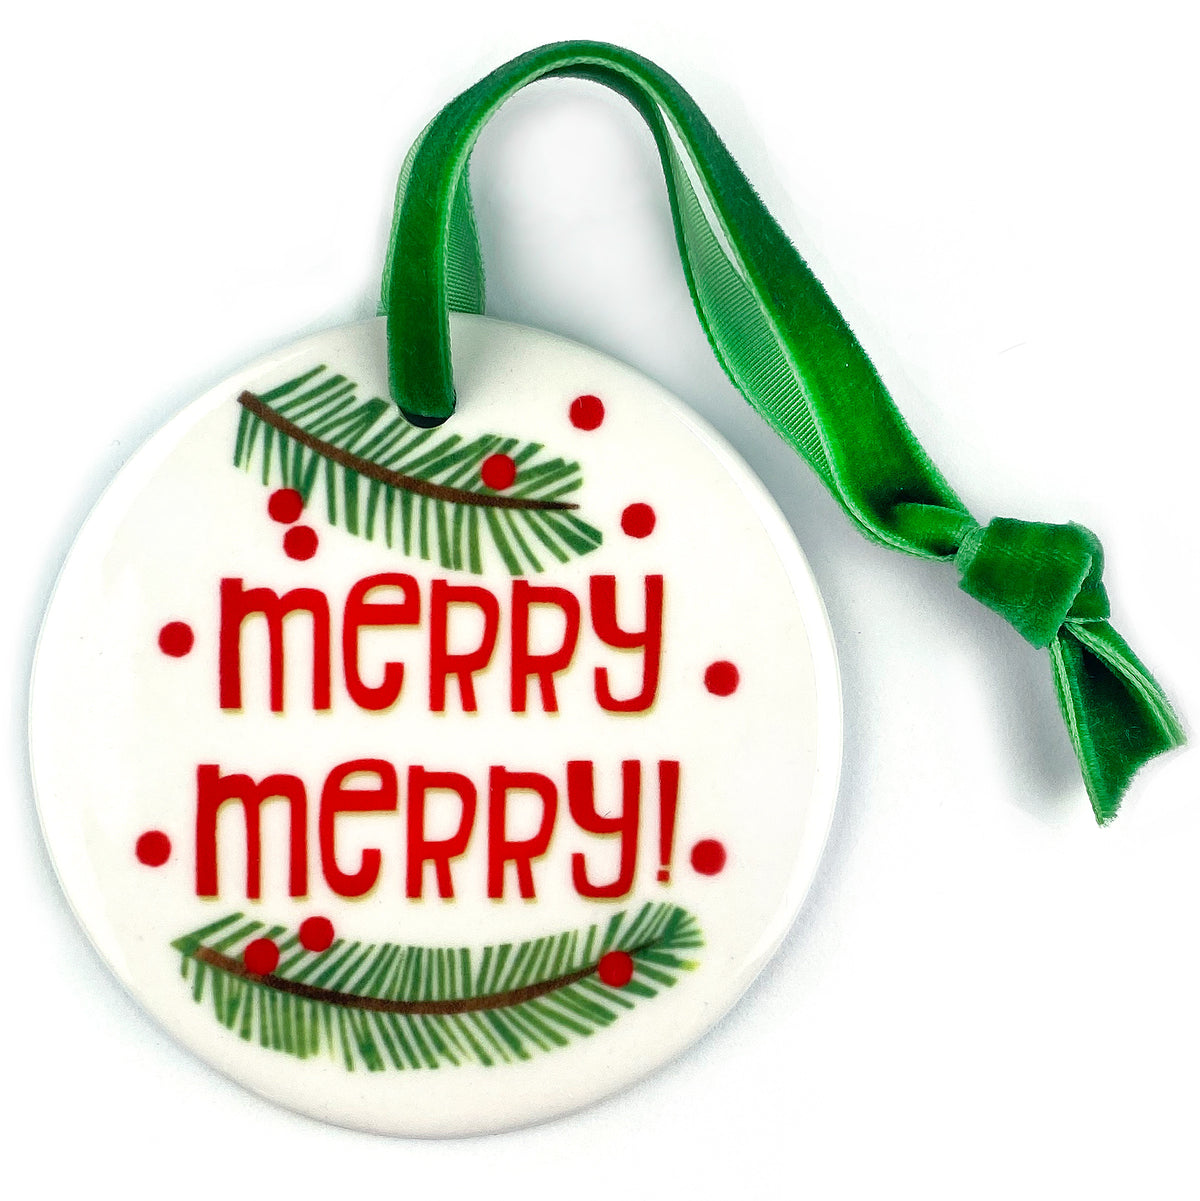 Ceramic Ornament with Merry Merry Print